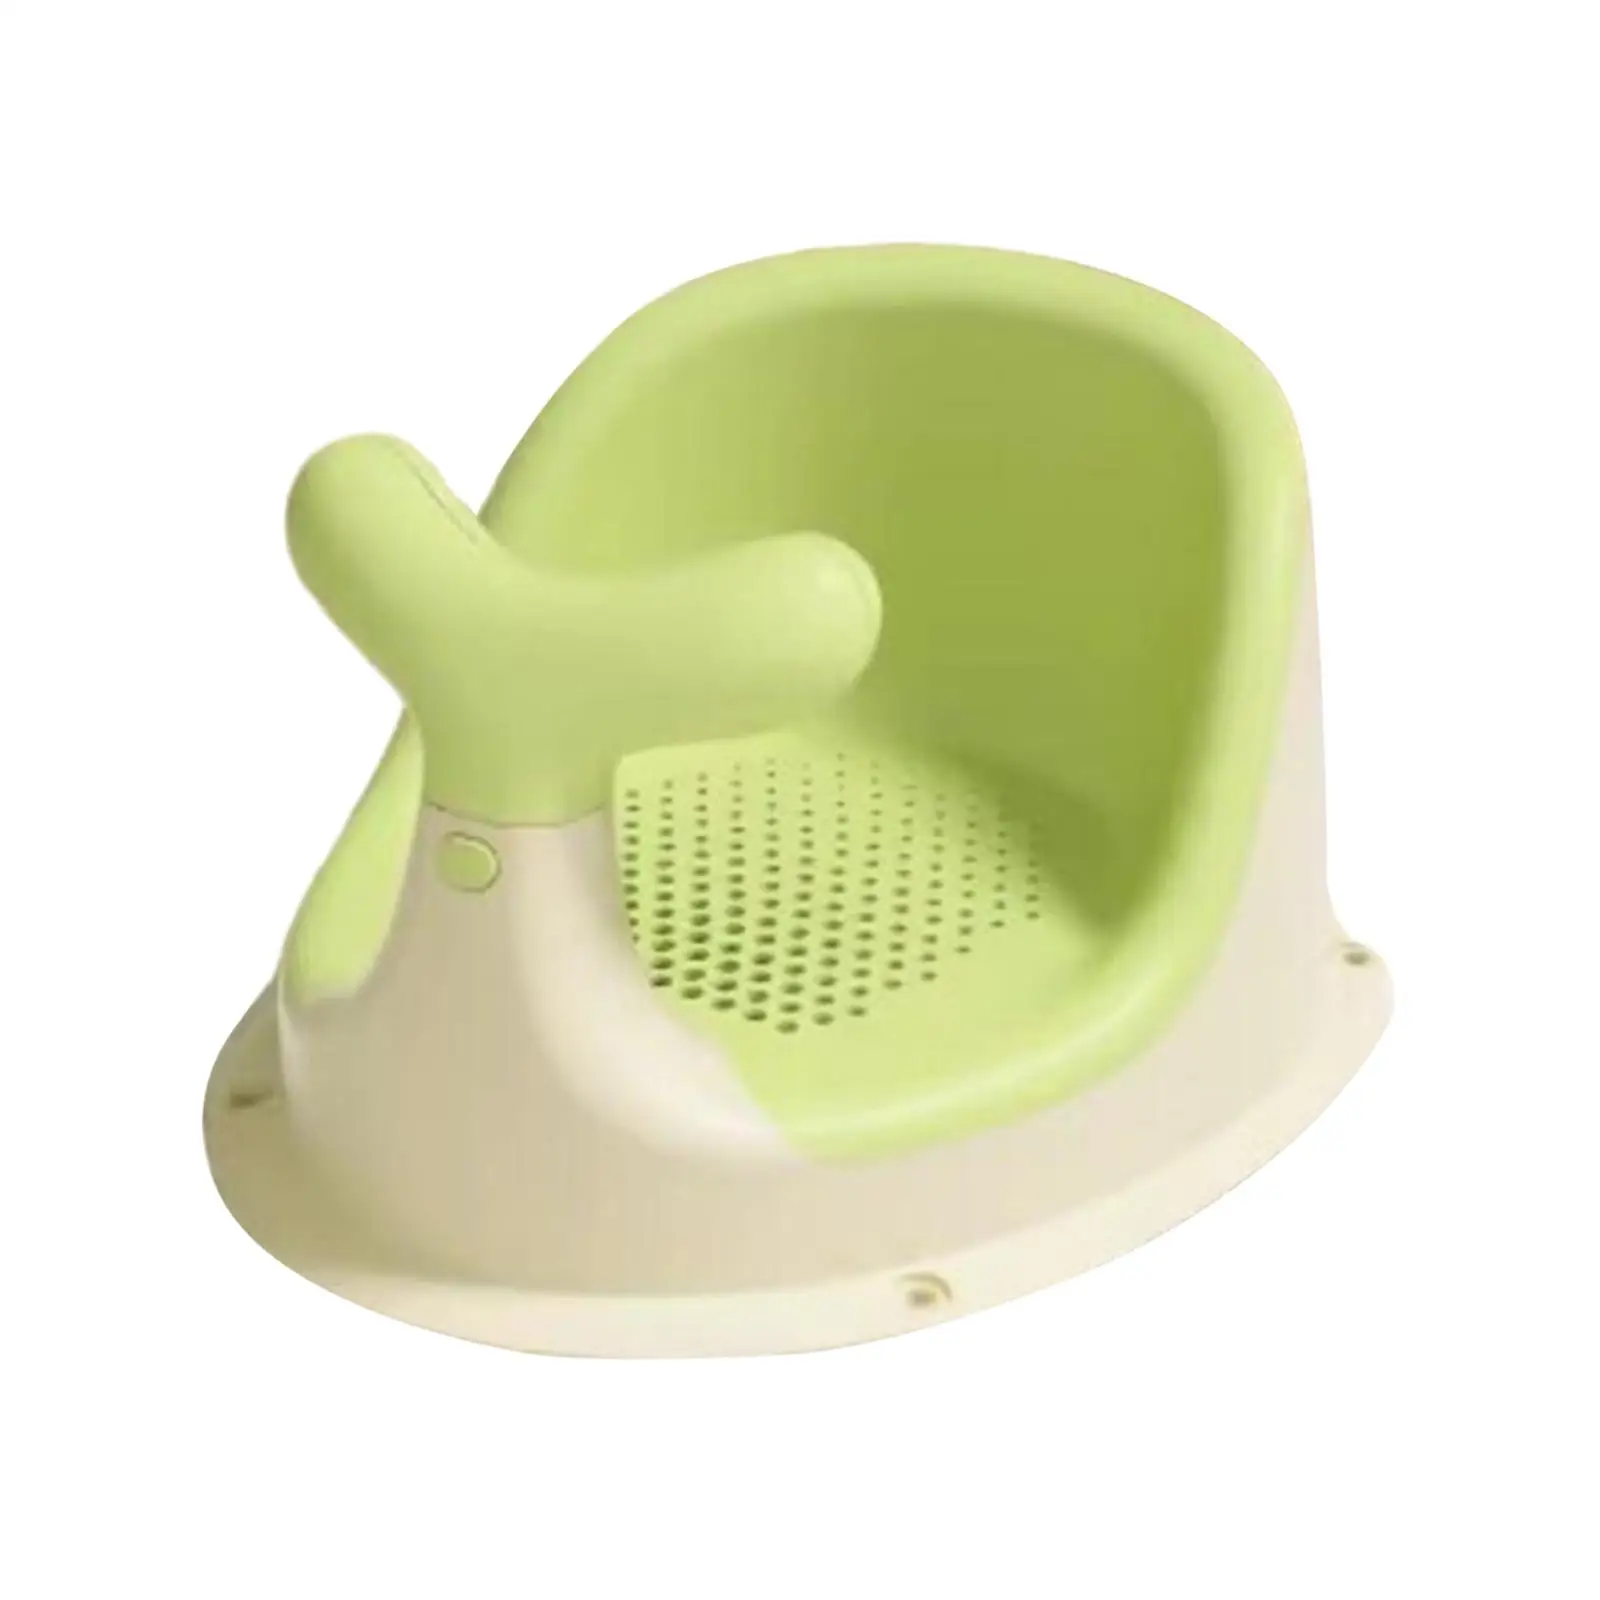 Baby Bath Seat Portable Stable Newborn Shower Seats Comfortable Toddlers Shower Seats for Boys Toddlers Baby Infants Girls